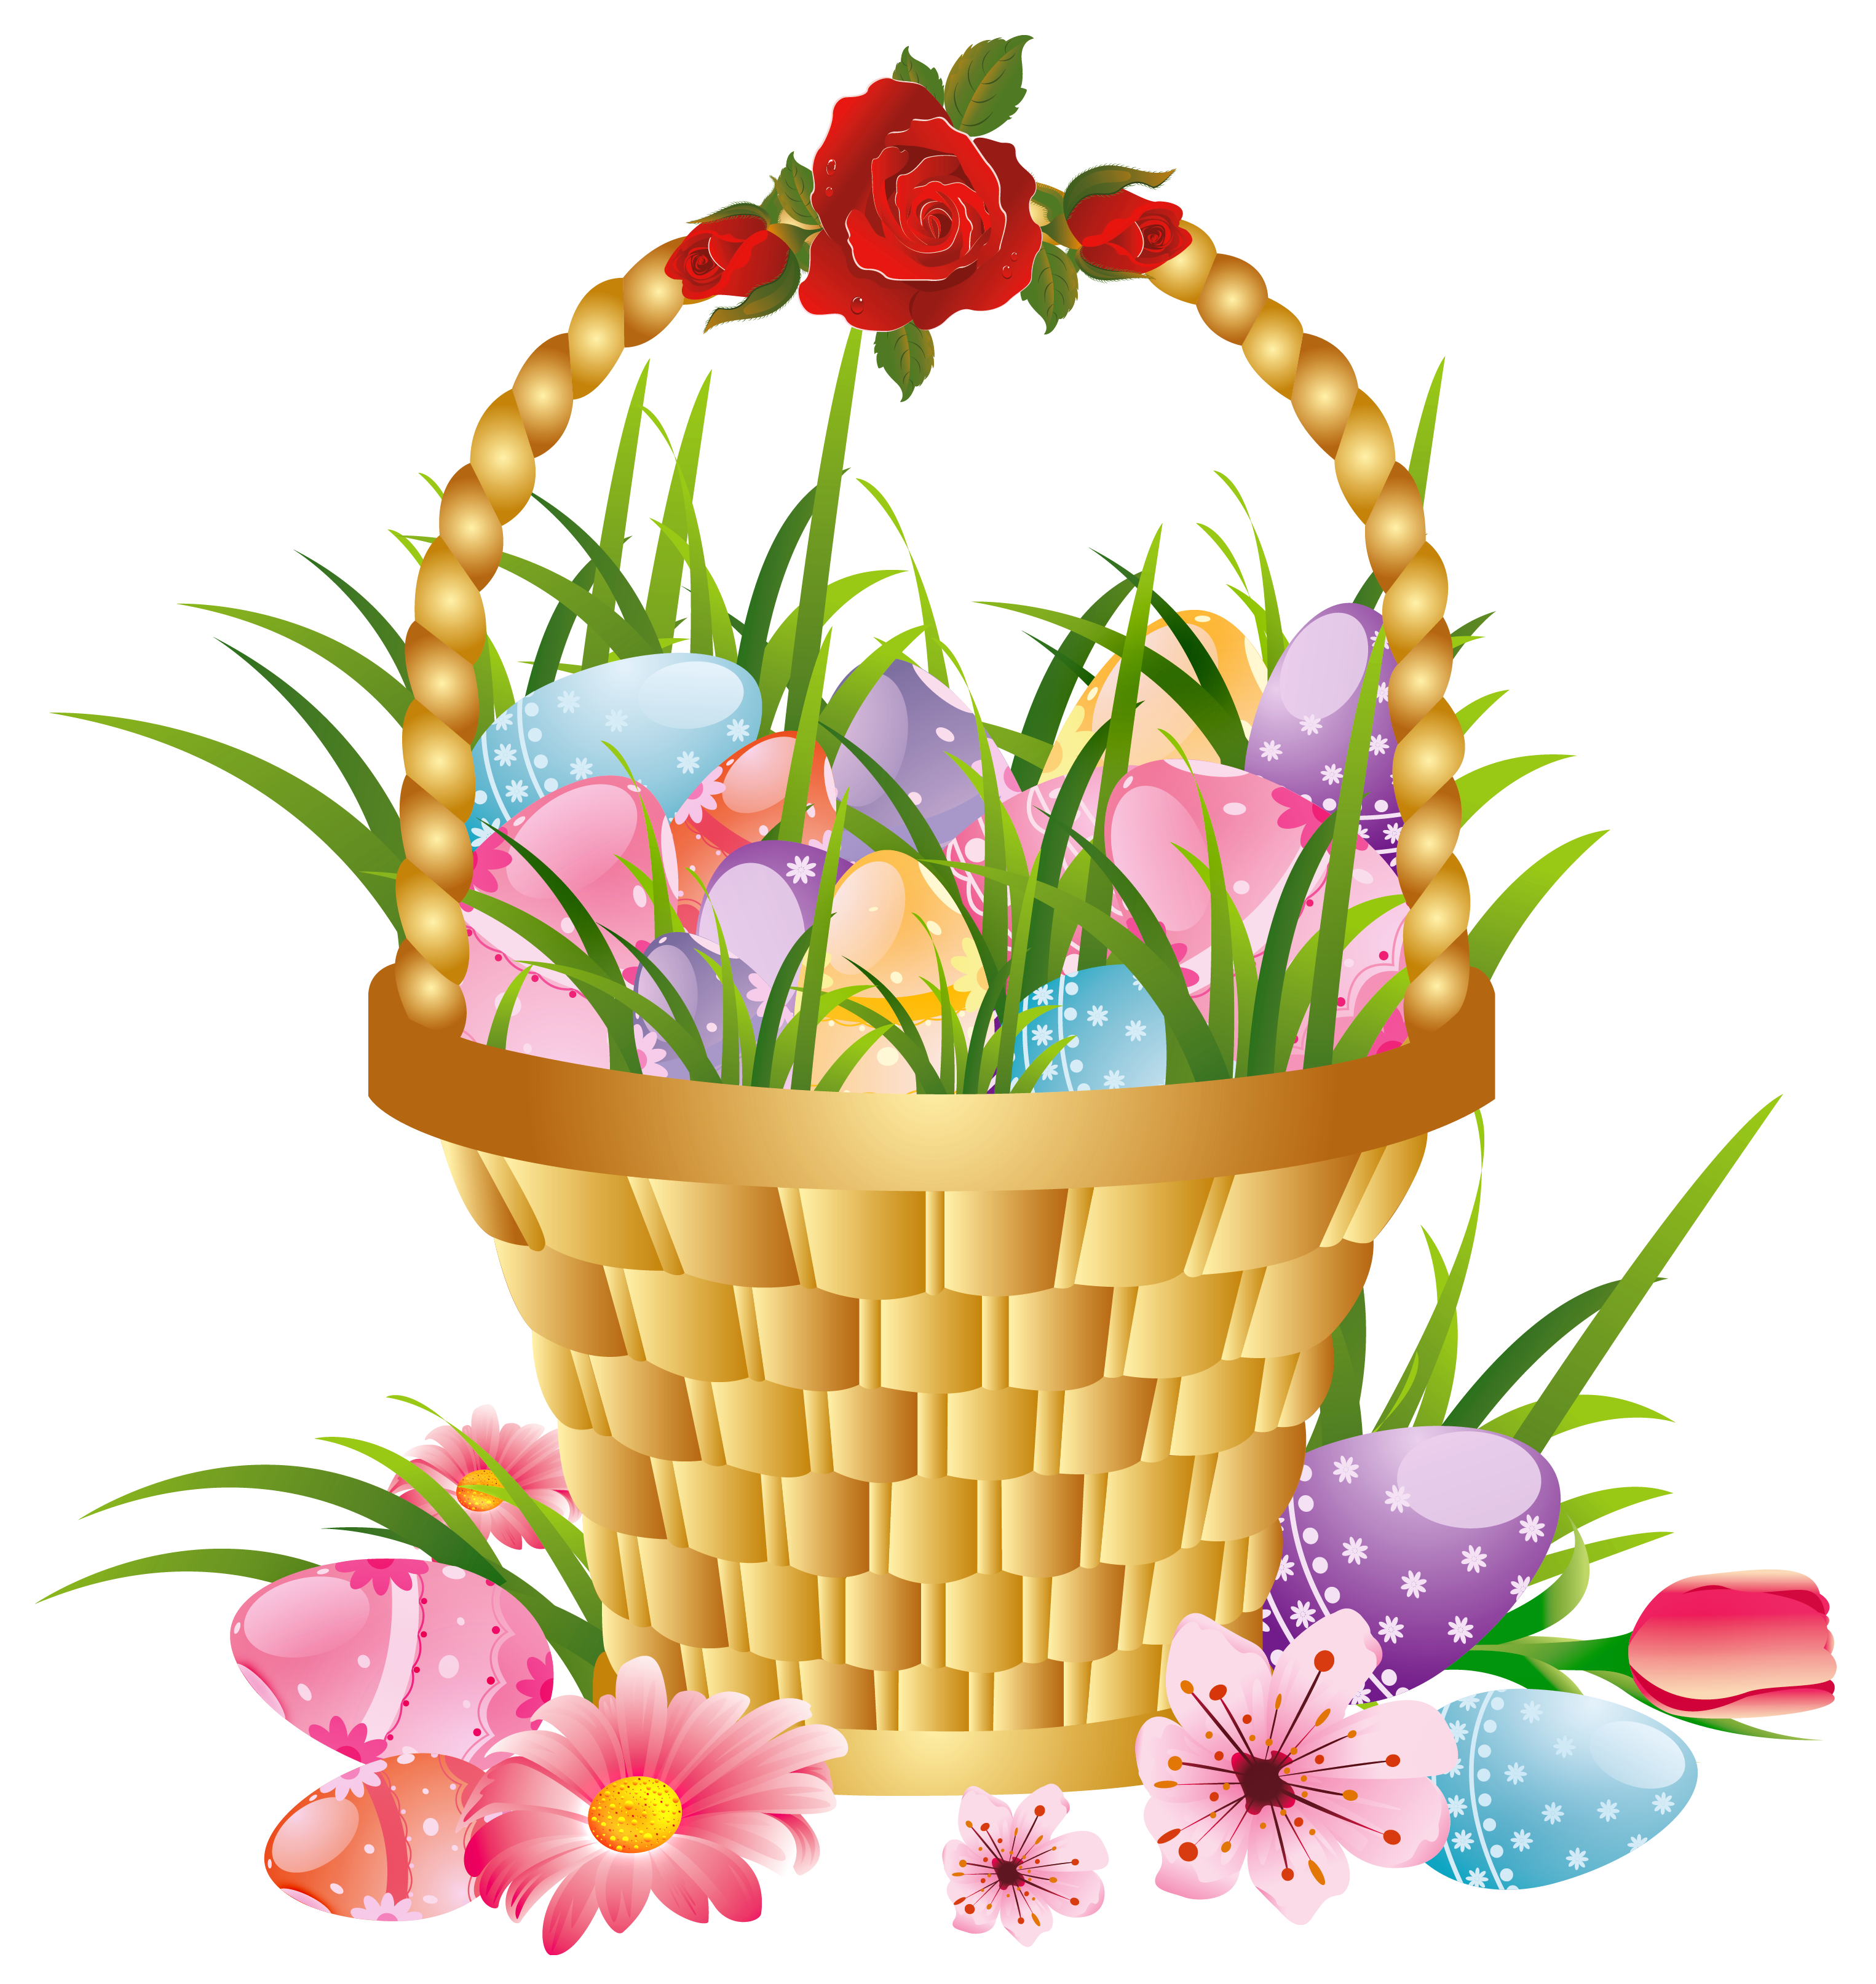 clip art for easter baskets - photo #19